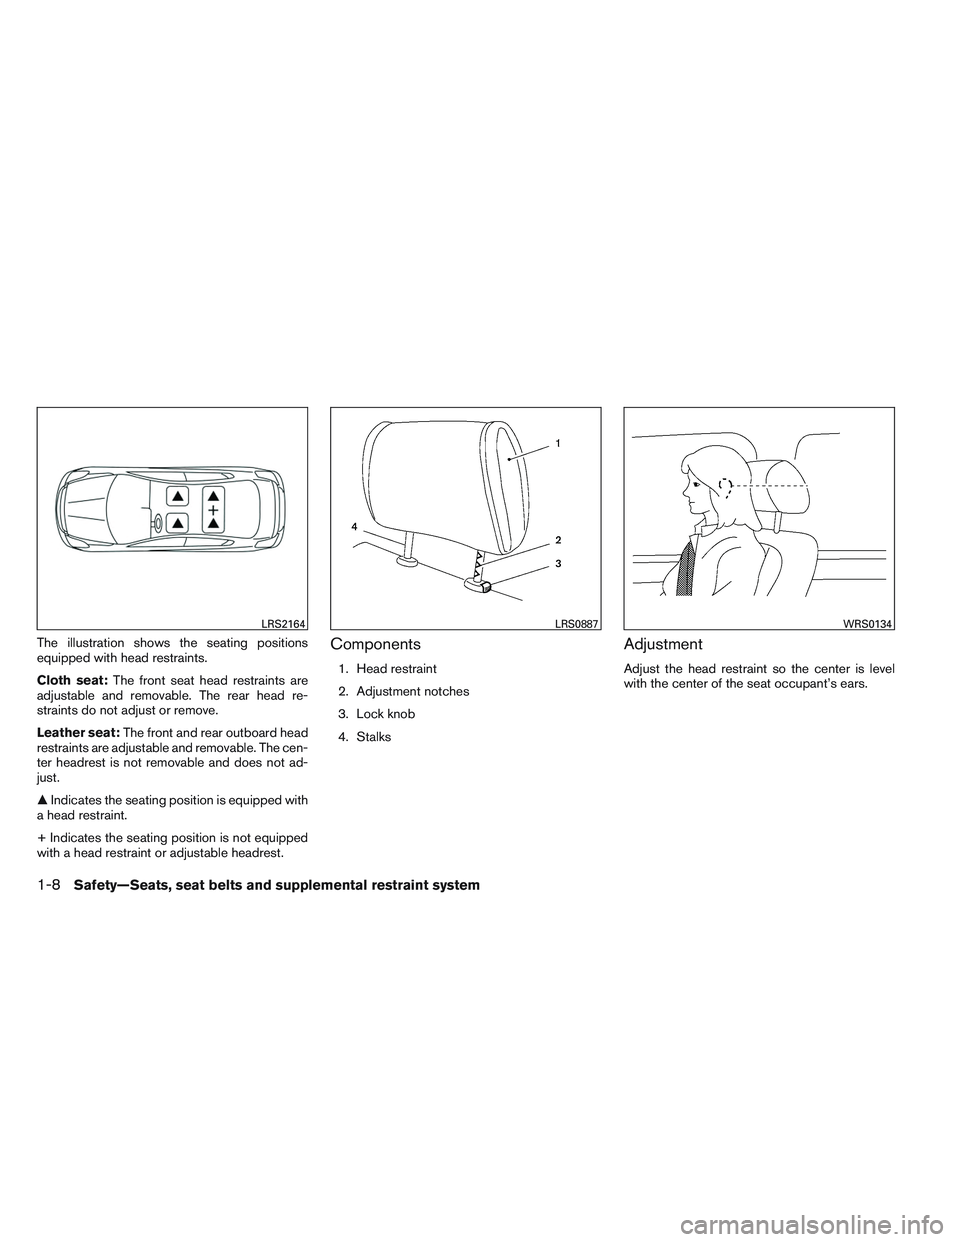 NISSAN ALTIMA SEDAN 2013  Owners Manual The illustration shows the seating positions
equipped with head restraints.
Cloth seat:The front seat head restraints are
adjustable and removable. The rear head re-
straints do not adjust or remove.
